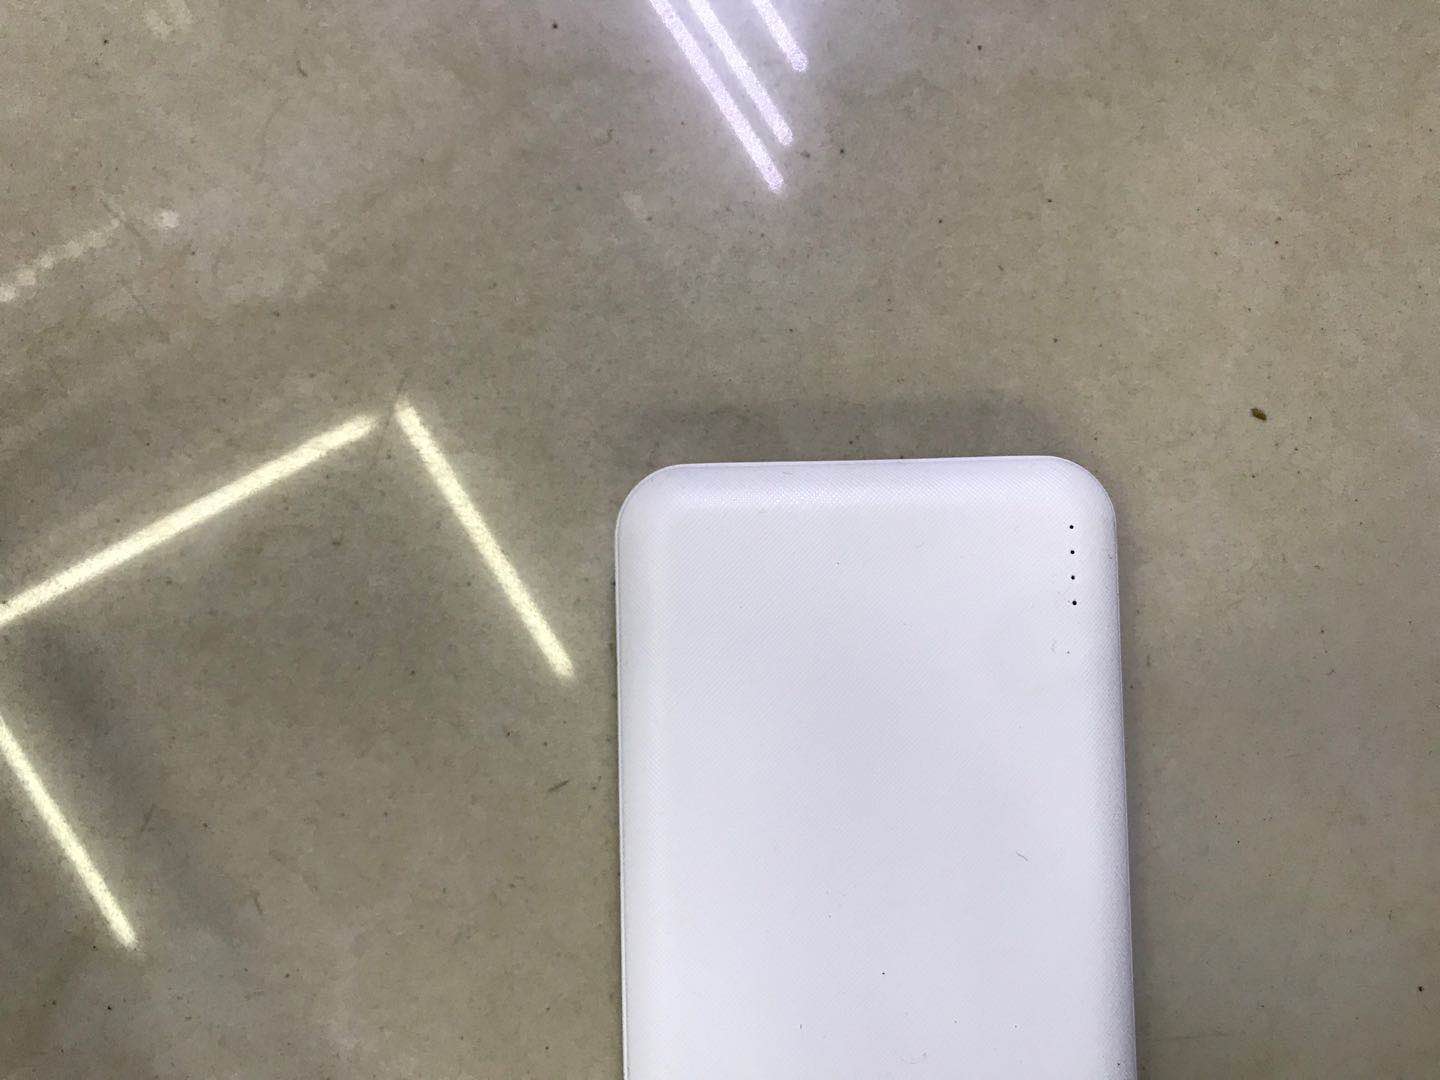 10000 MA White Flash Charge Power Bank Large Capacity Ultra-Thin Compact Portable Suitable for Xiaomi Apple Hua